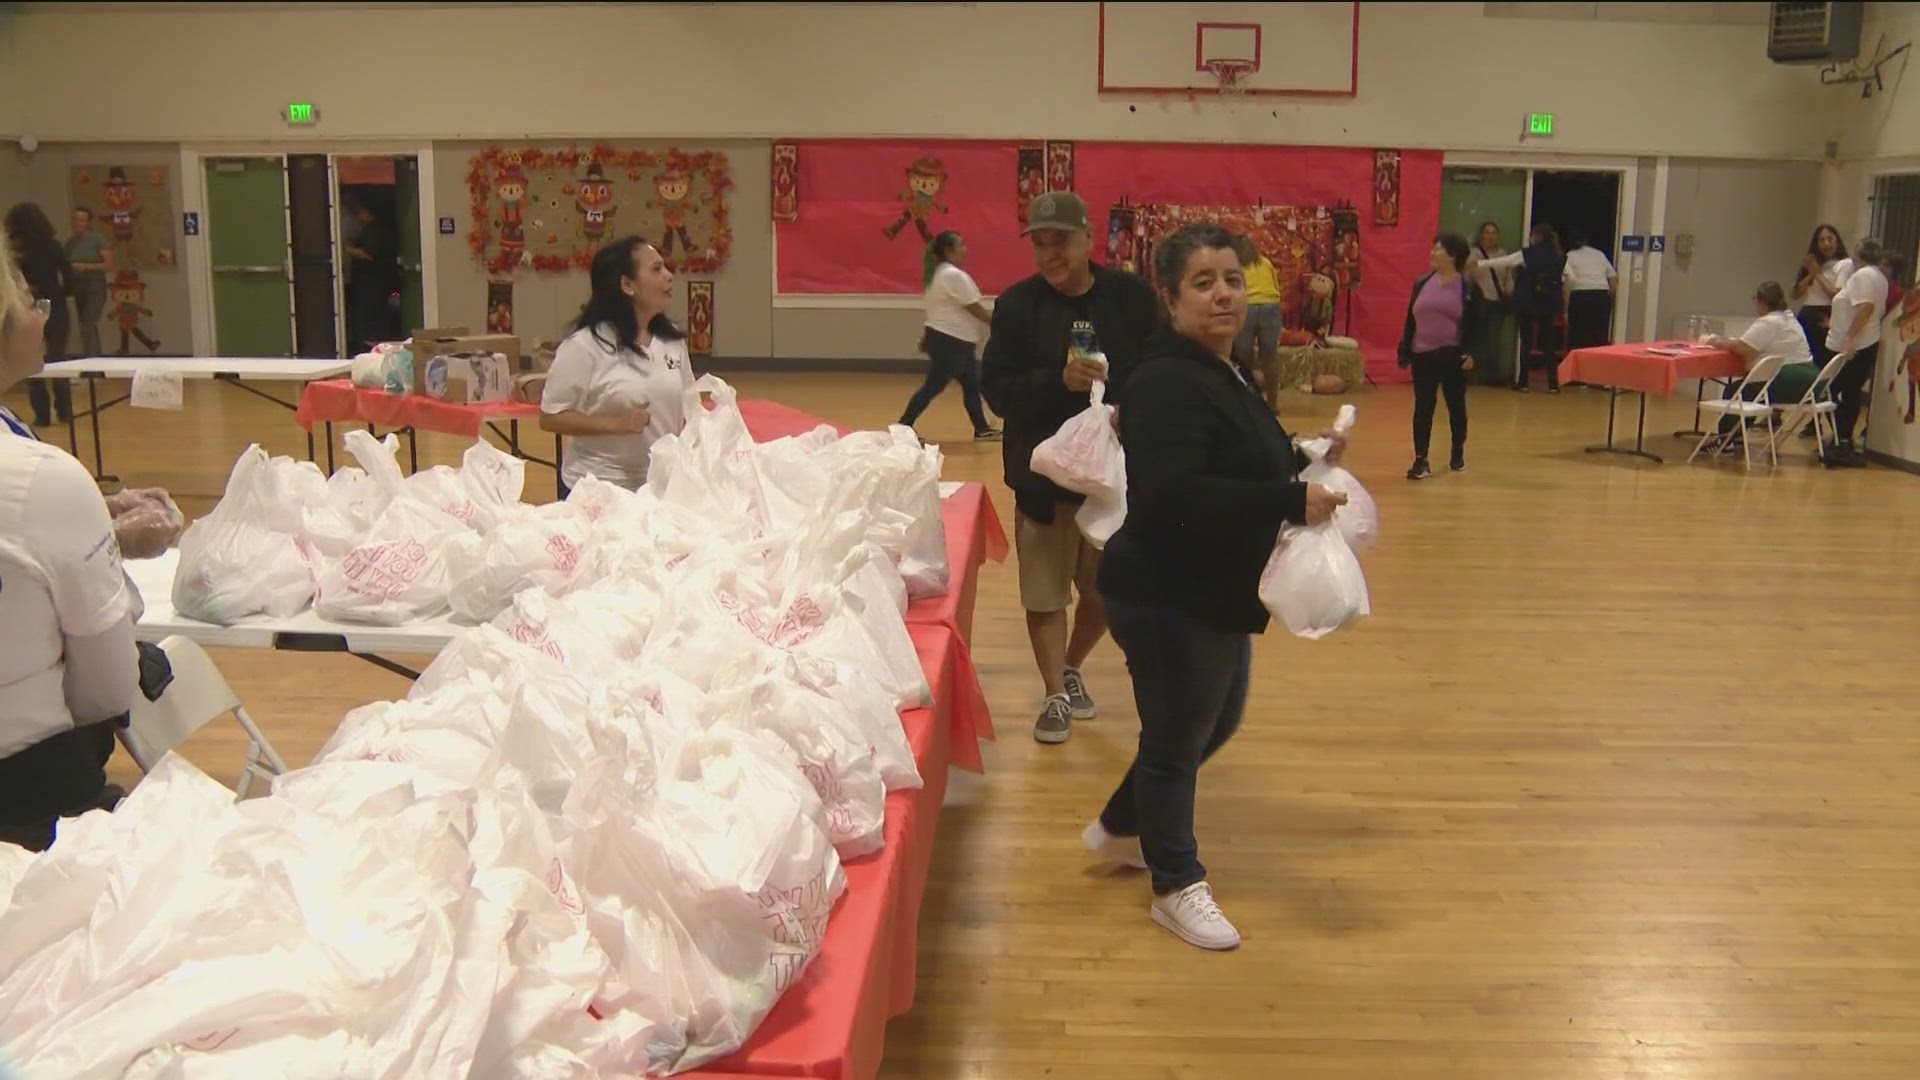 Hundreds of people came through the San Ysidro Civic Center to pick up Thanksgiving dinners. The organization also delivered meals to nearby senior living centers.